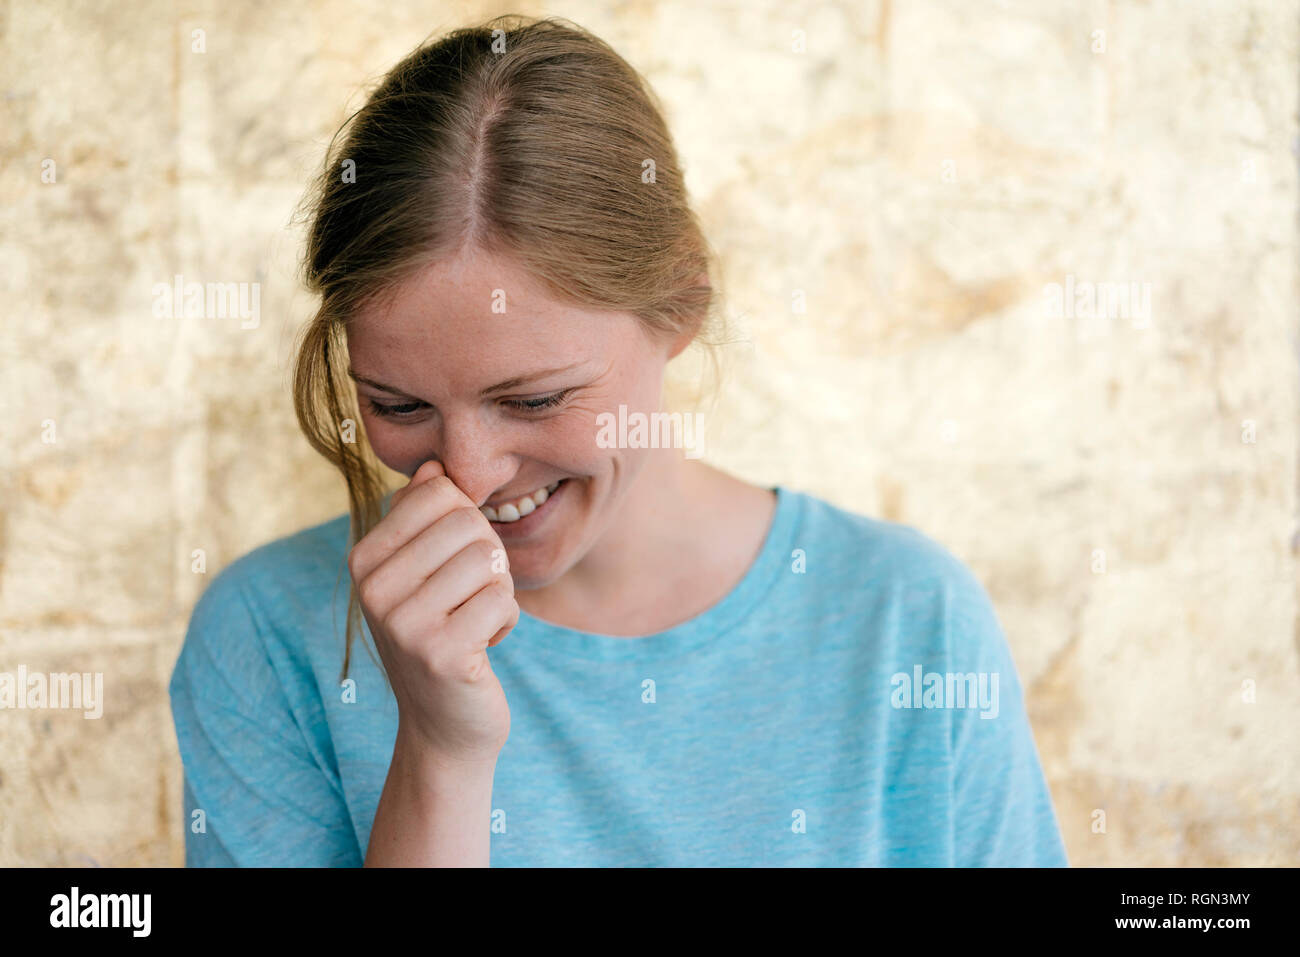 Portrait of laughing young woman Stock Photo